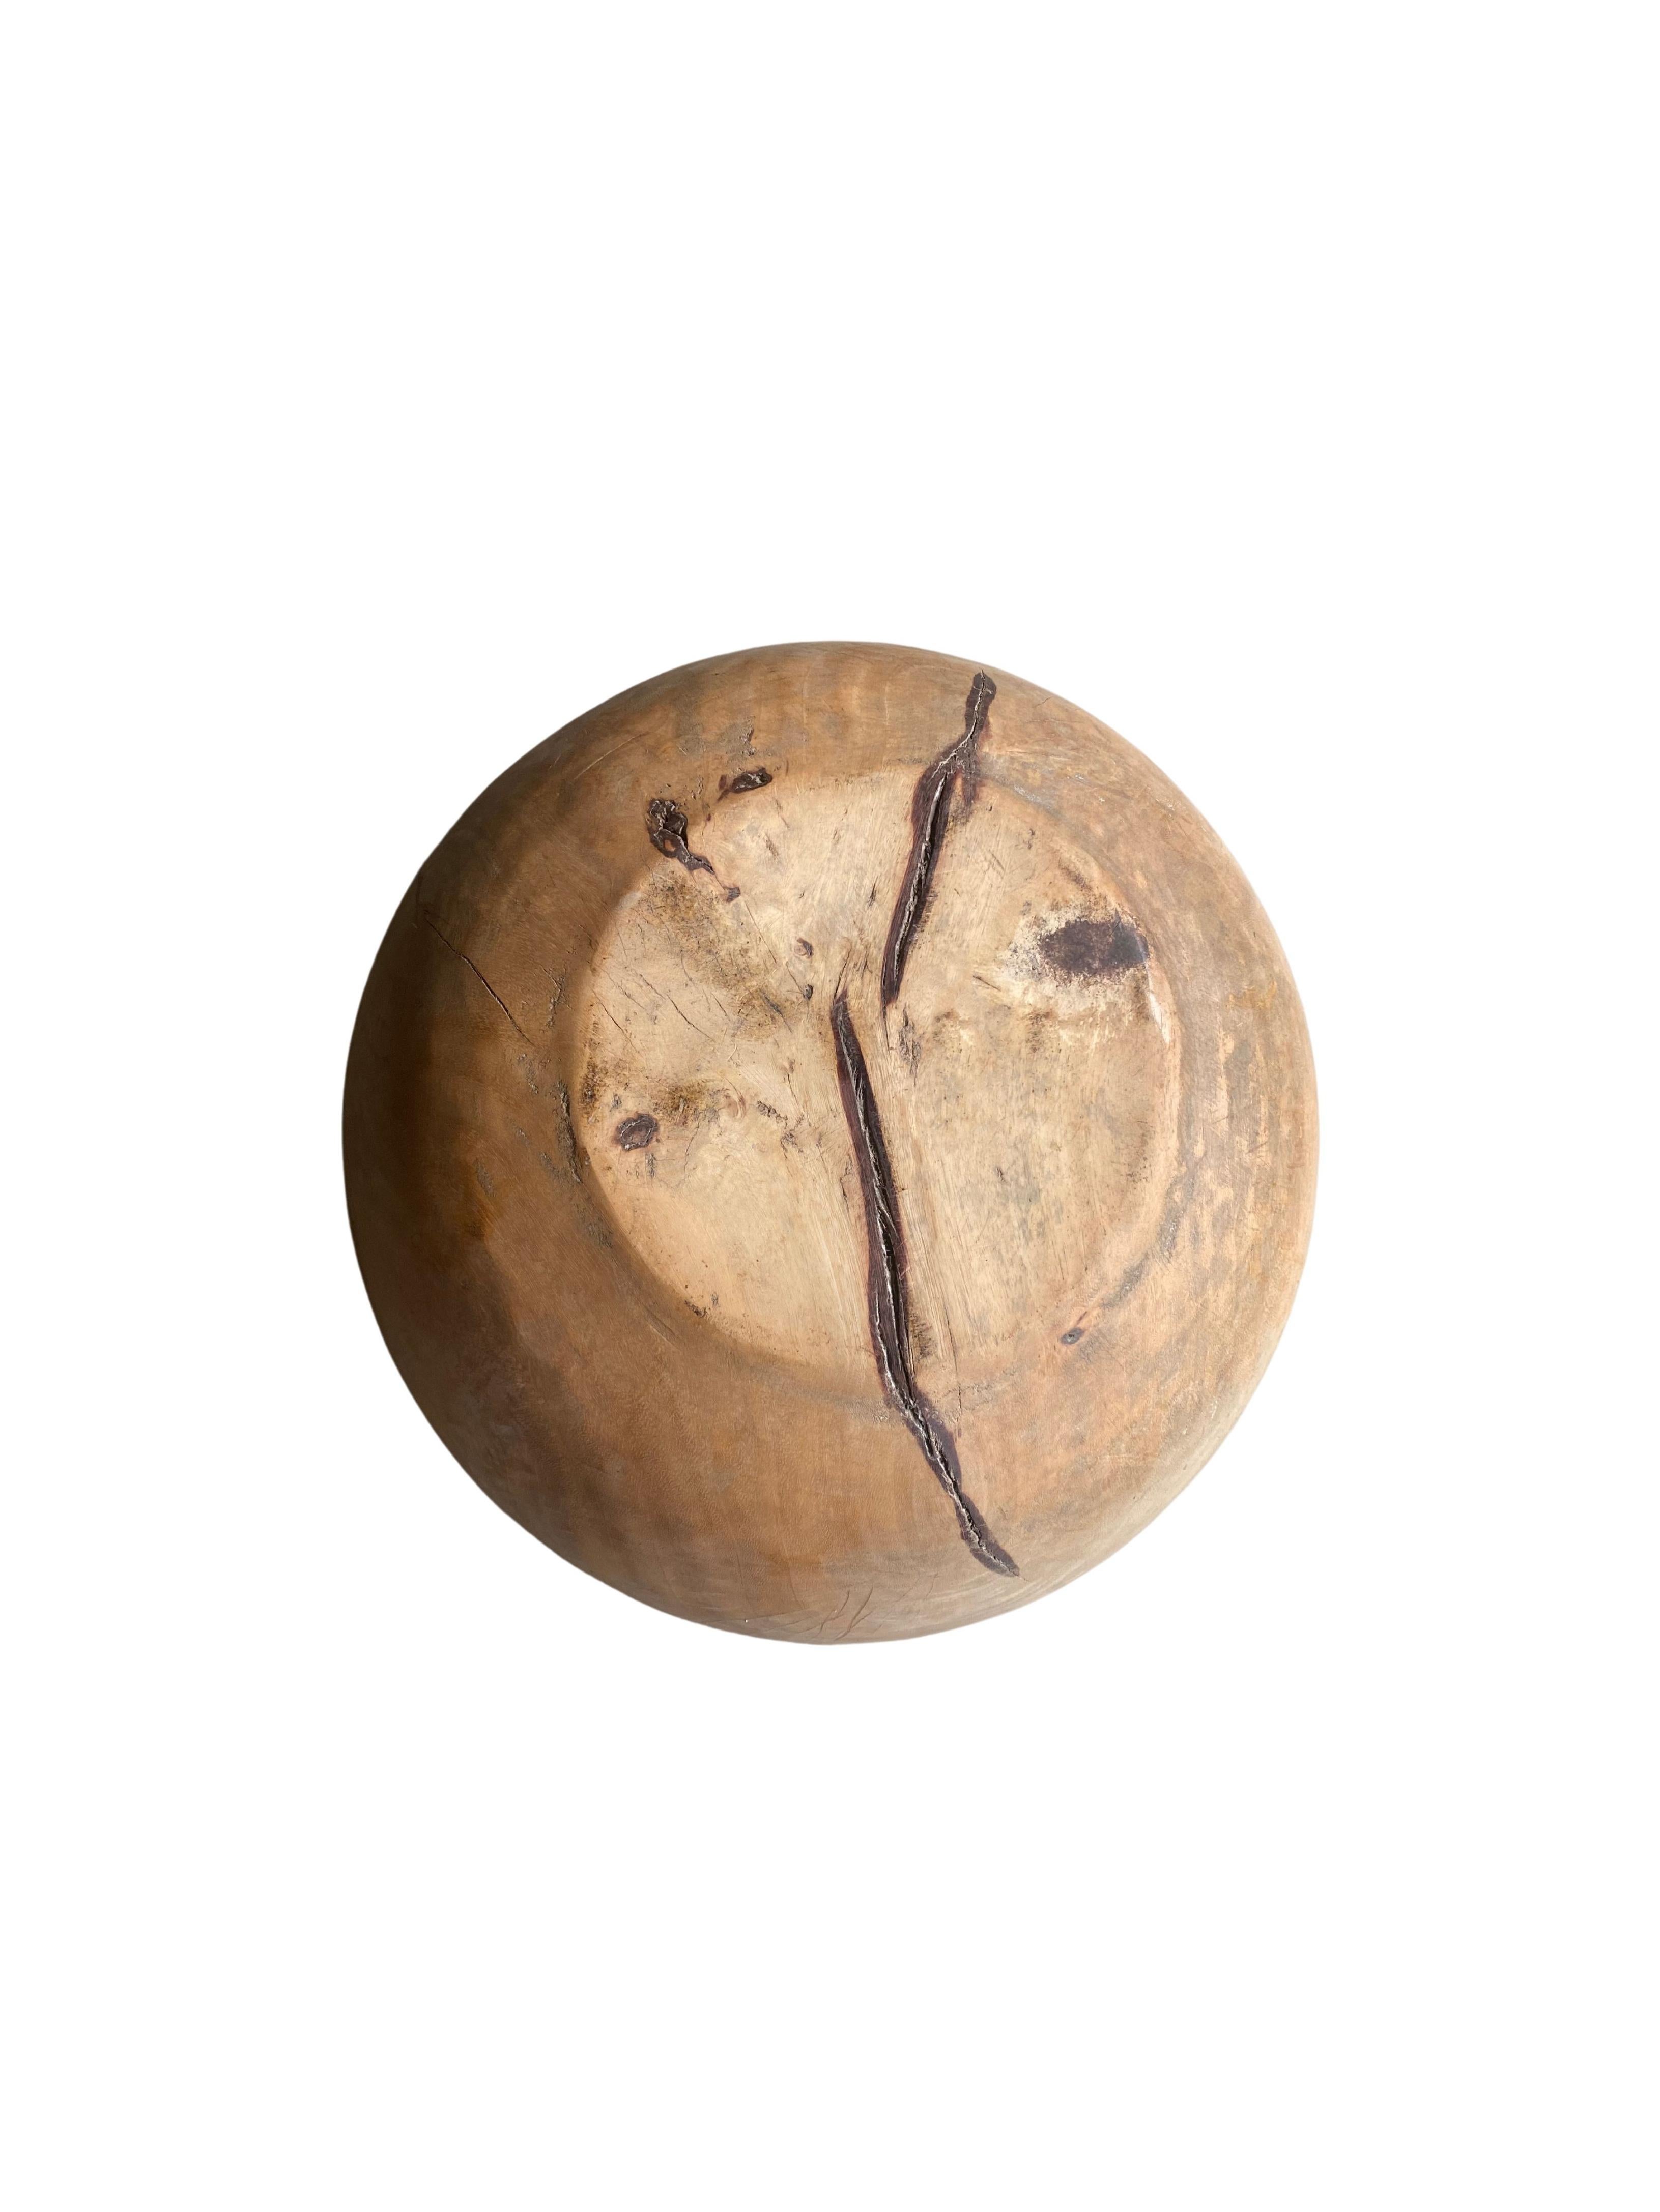 Solid Teak Burl Wood Bowl from Java, Indonesia In Good Condition For Sale In Jimbaran, Bali